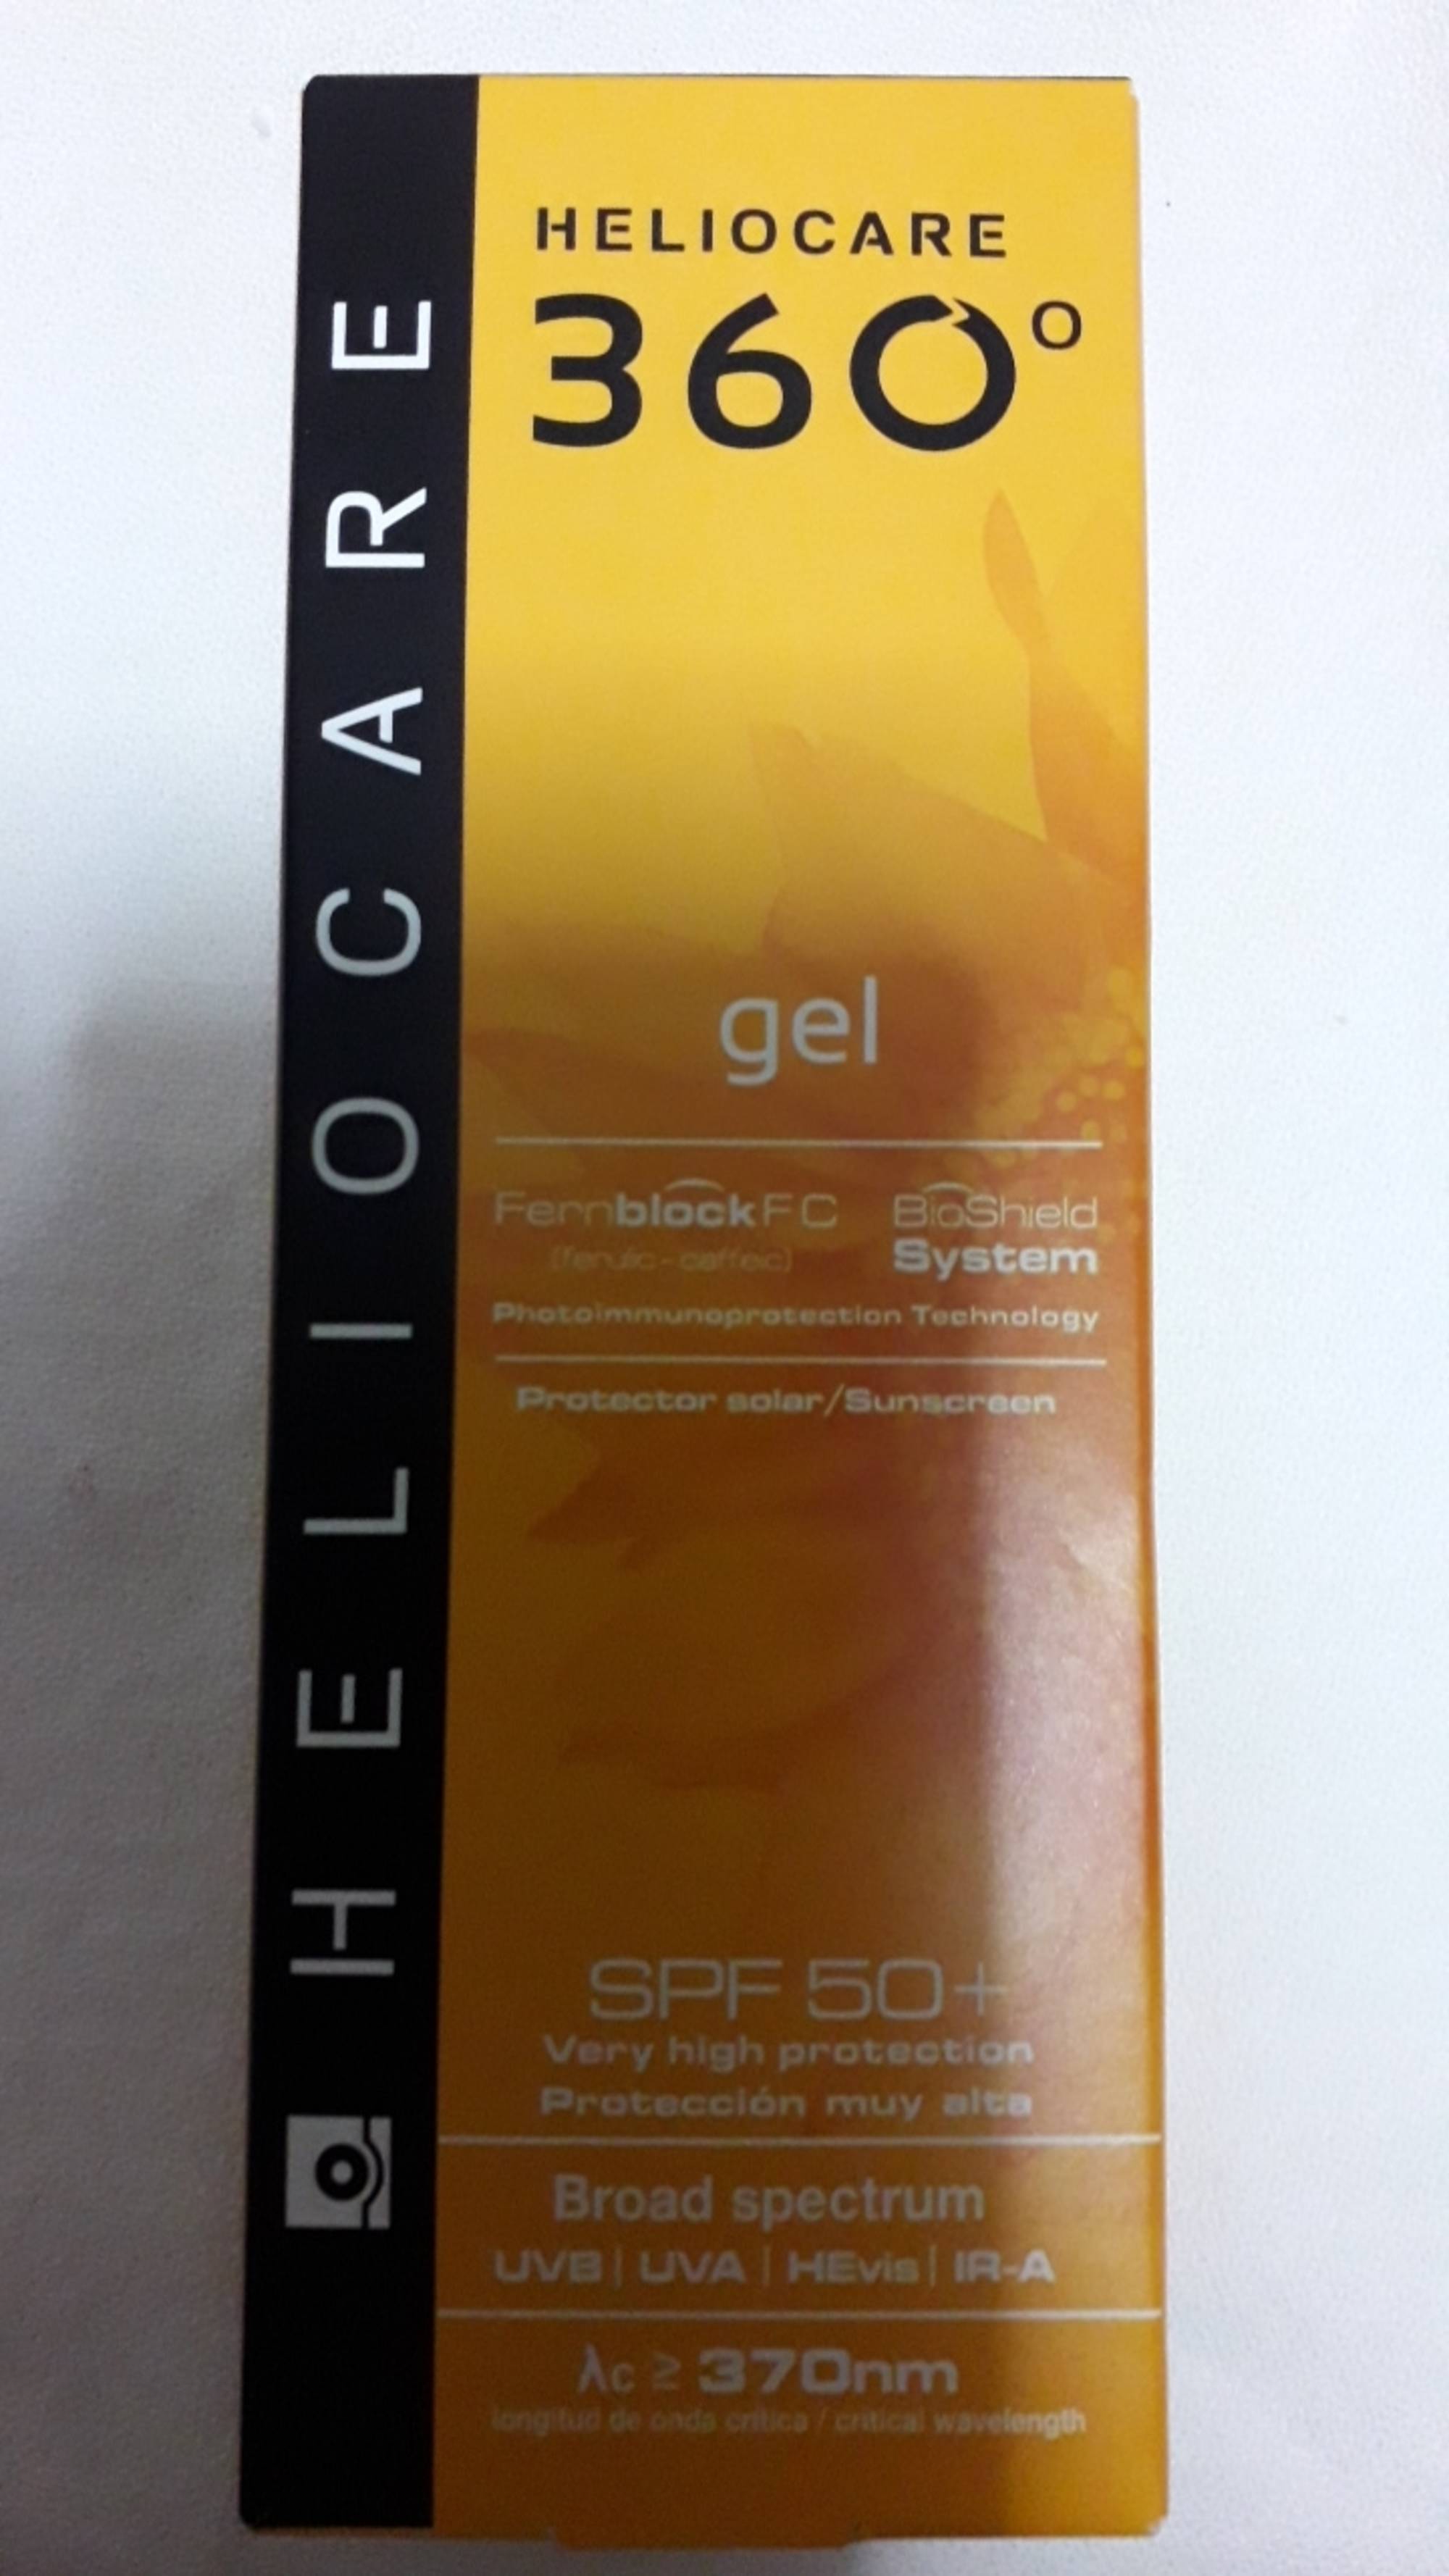 HELIOCARE - 360° - Gel SPF 50+ very high protection